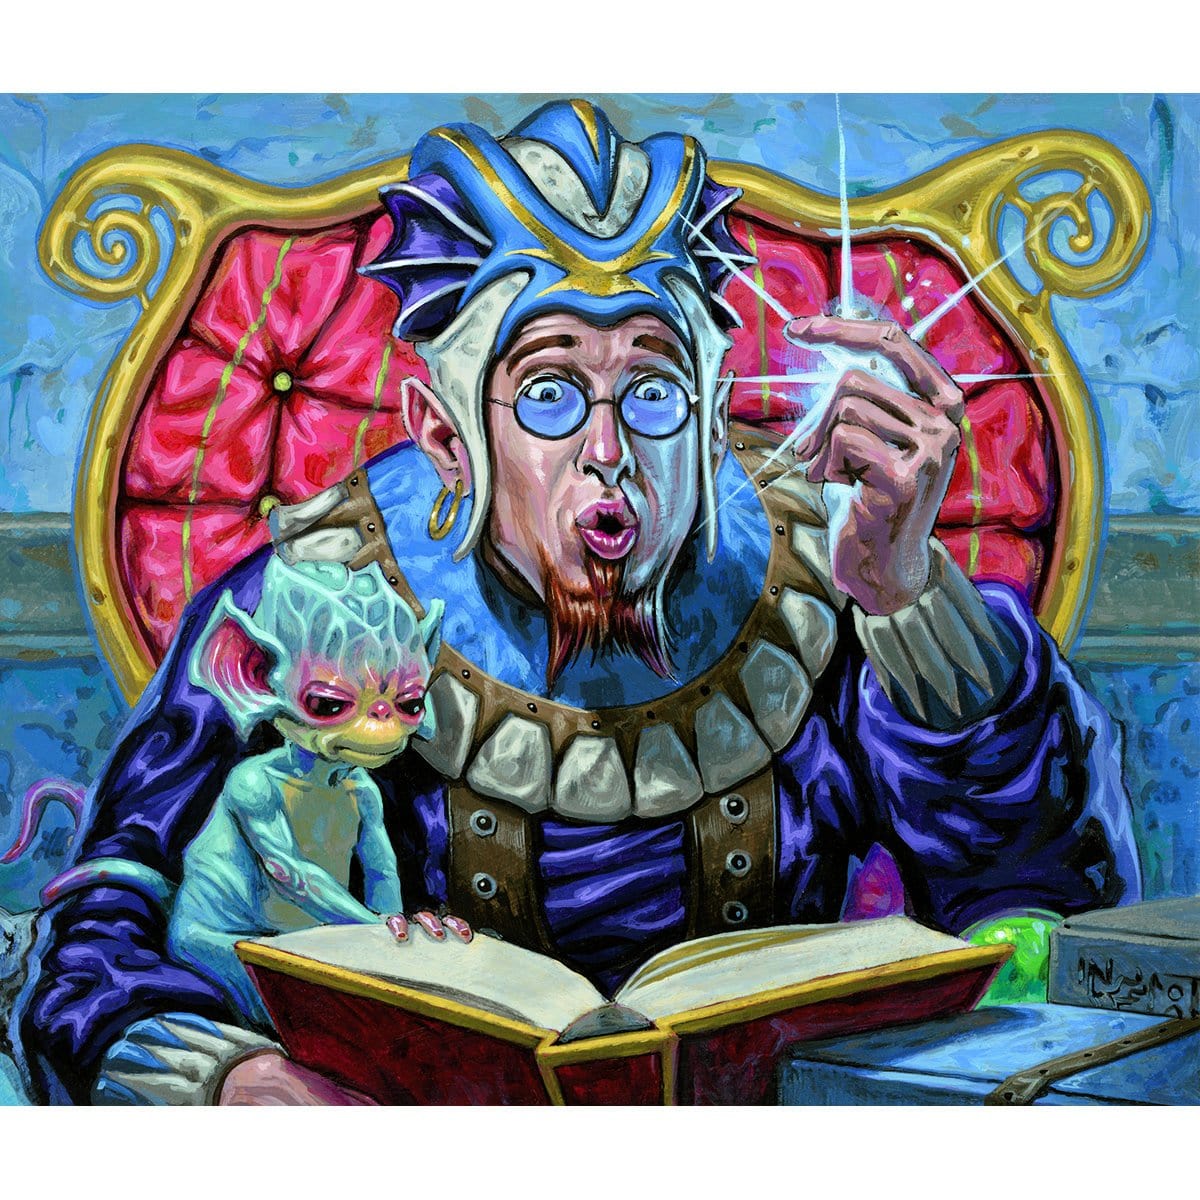 Inspiration Print - Print - Original Magic Art - Accessories for Magic the Gathering and other card games